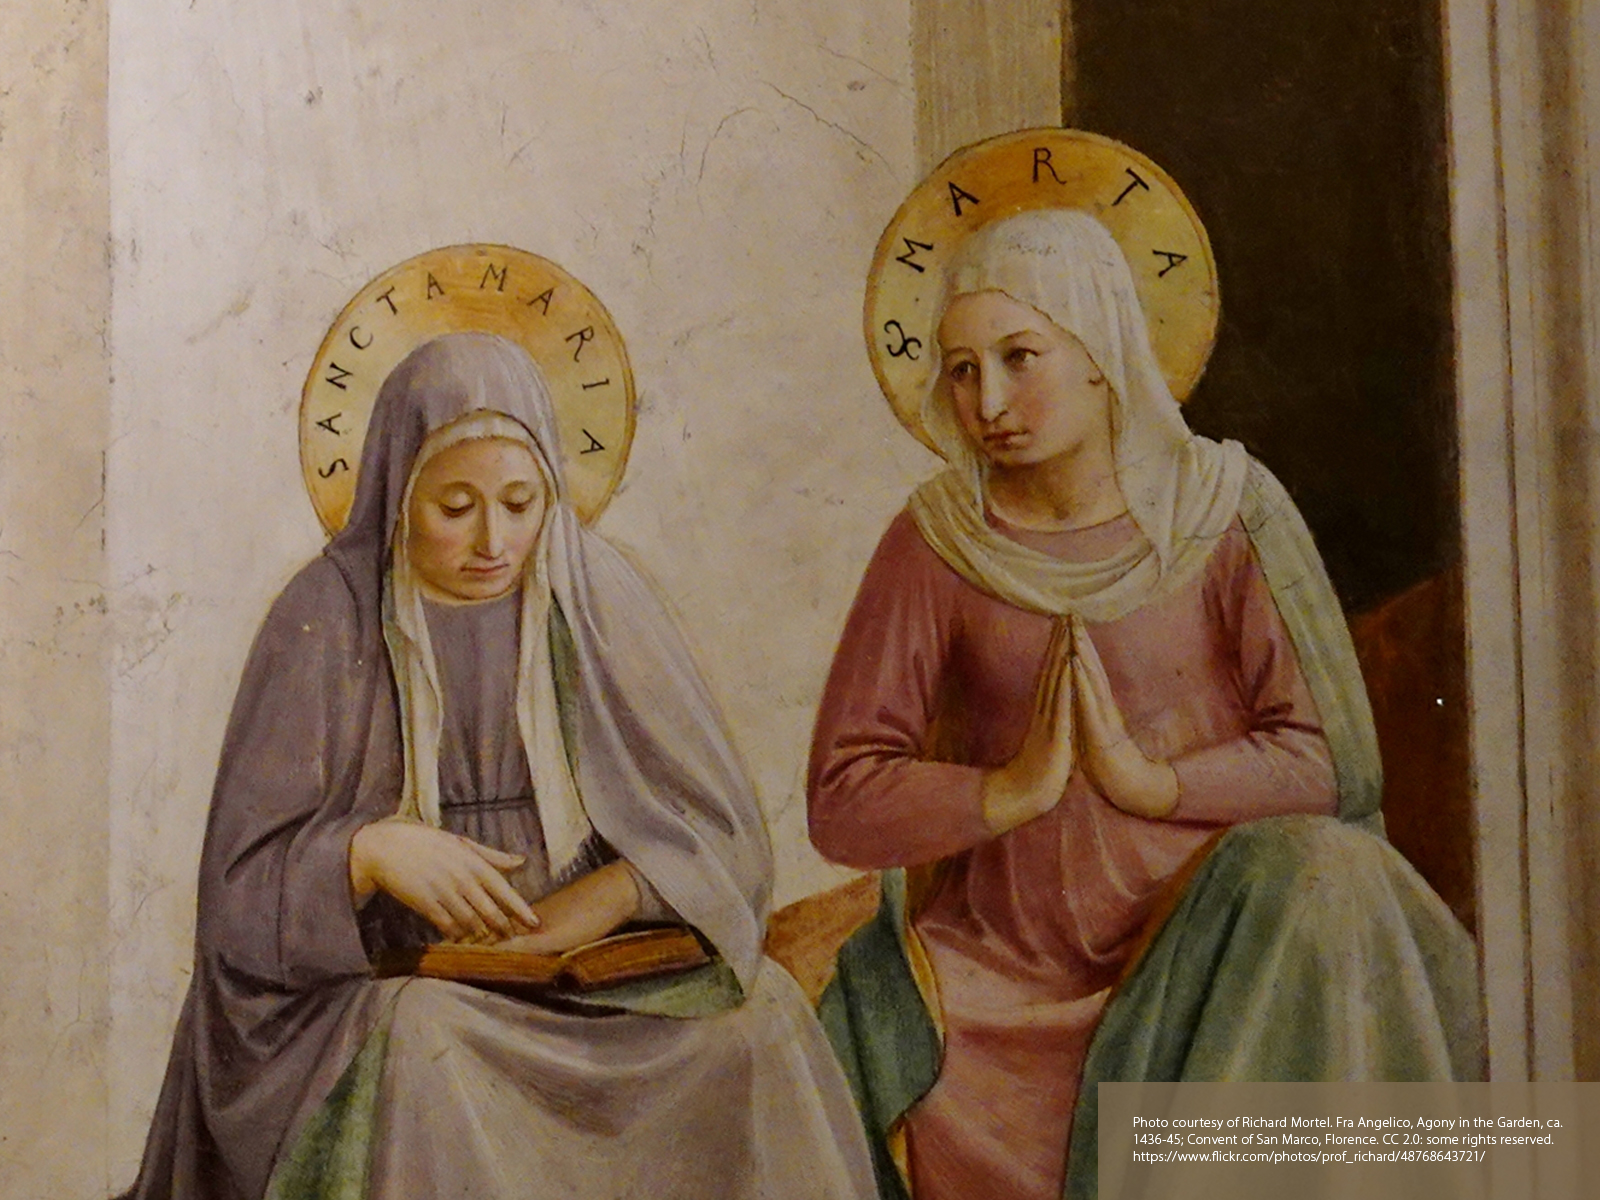 A medieval style painting of two people sitting beside each other. They both have halos, one is praying and one is holding a book